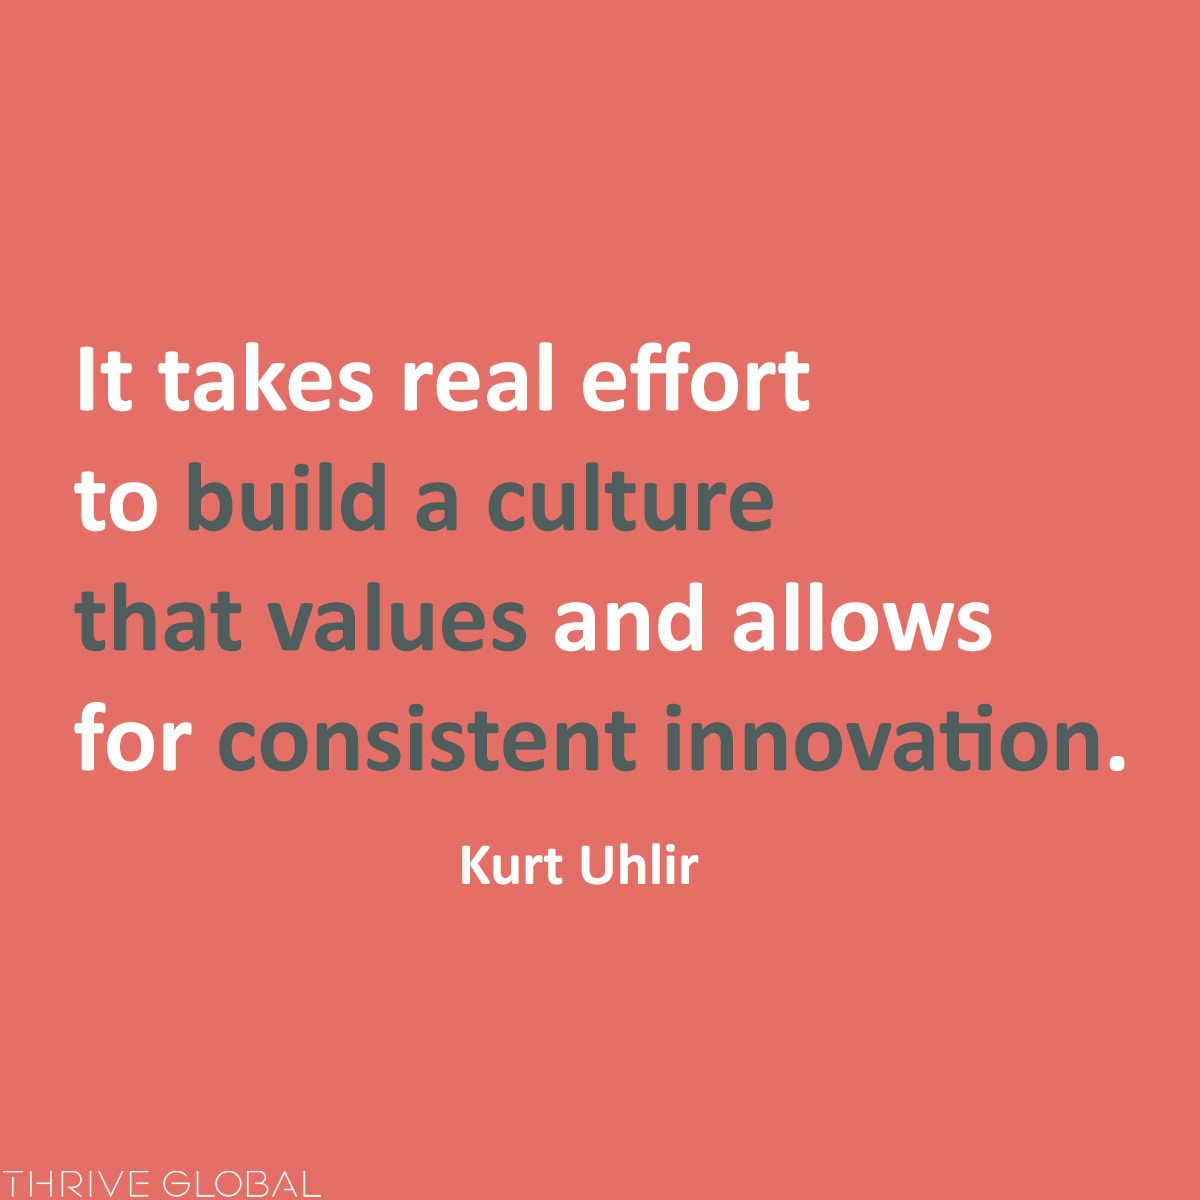 It takes real effort to build a culture that values and allows for consistent innovation.